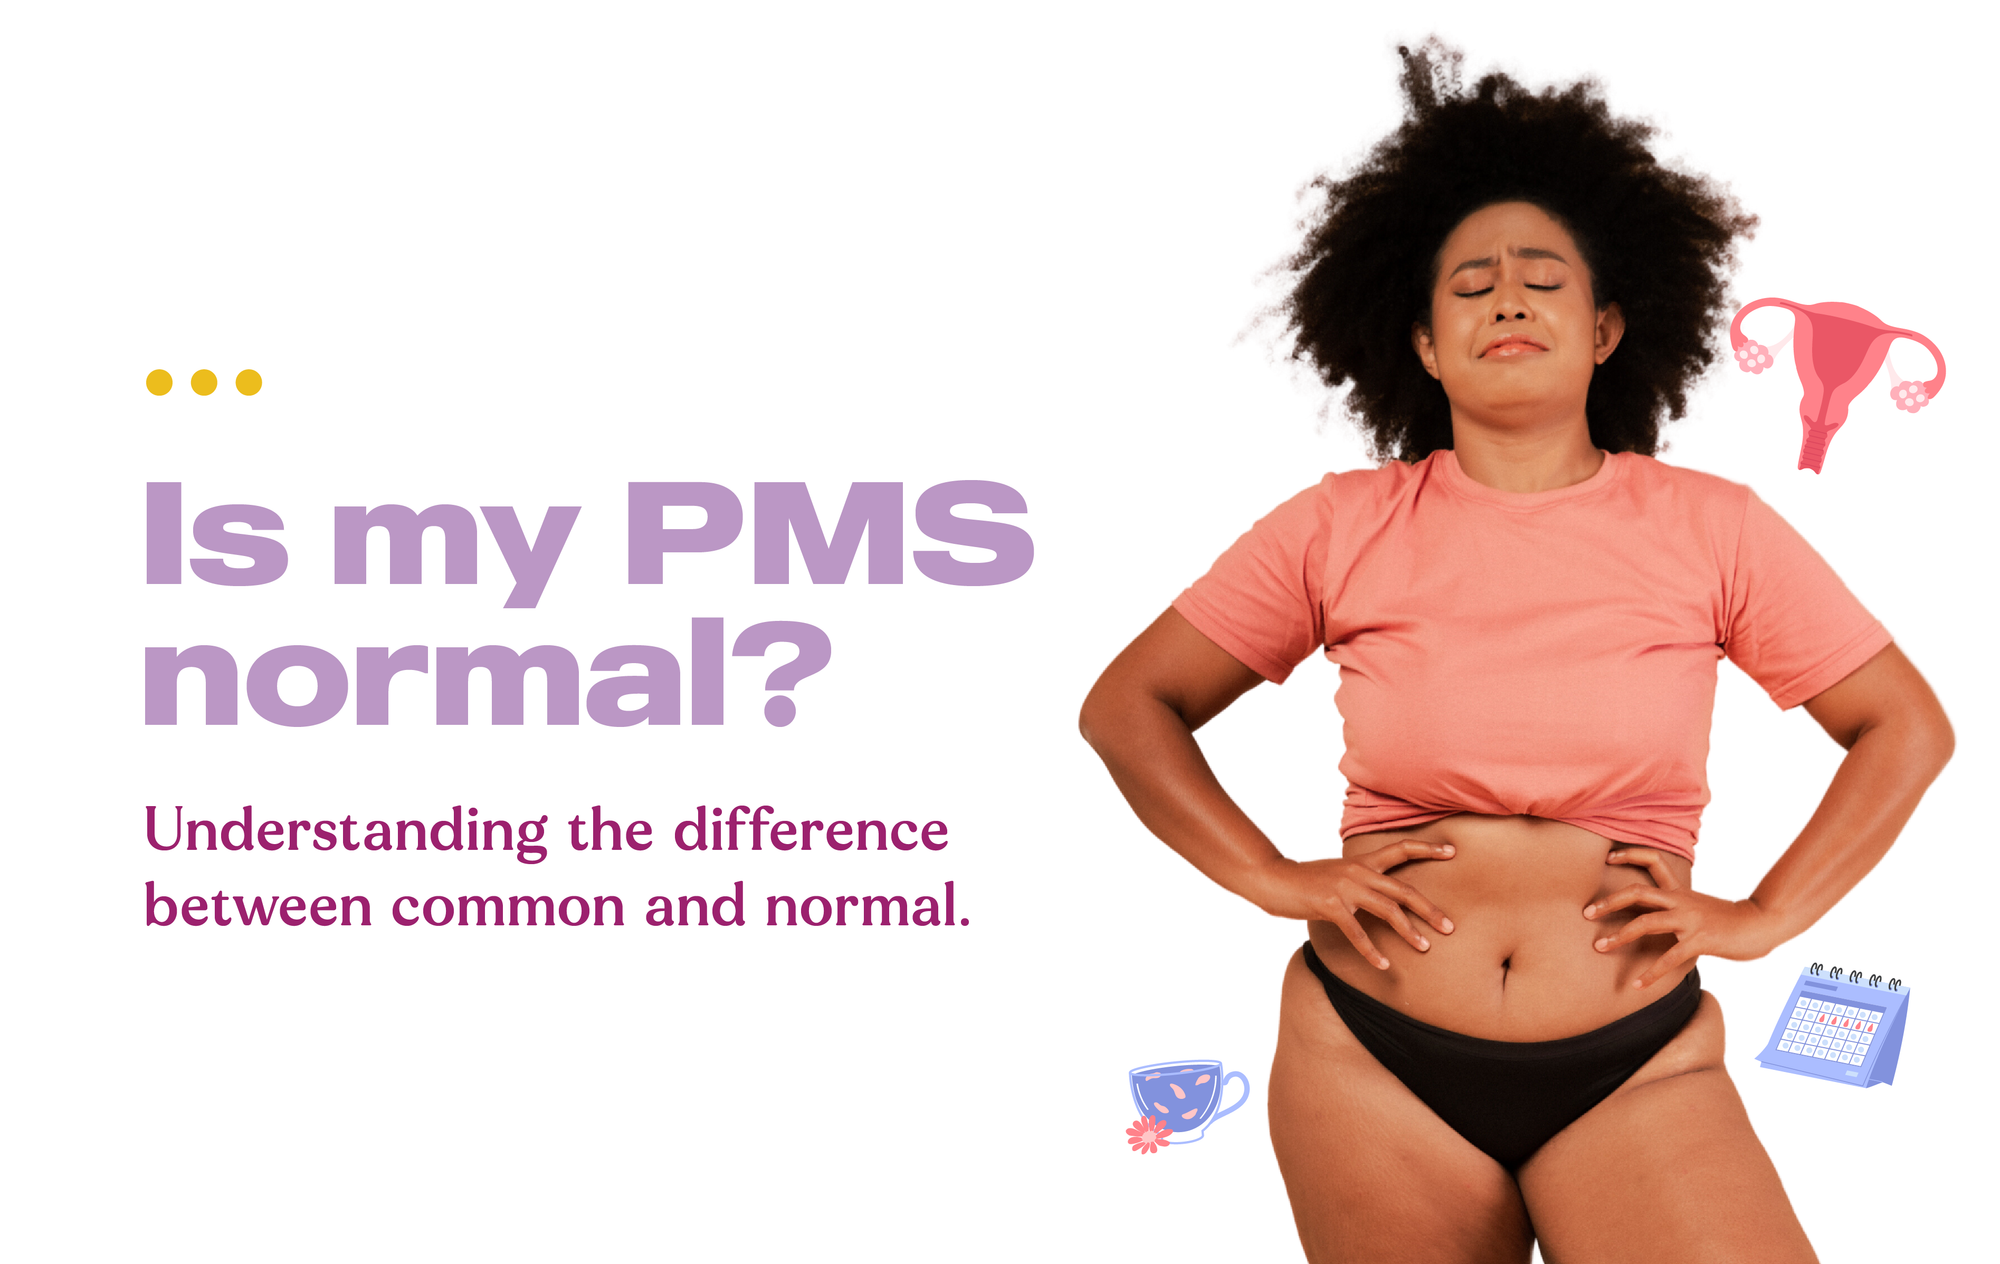 Is my PMS normal? Understanding the difference between common and normal.